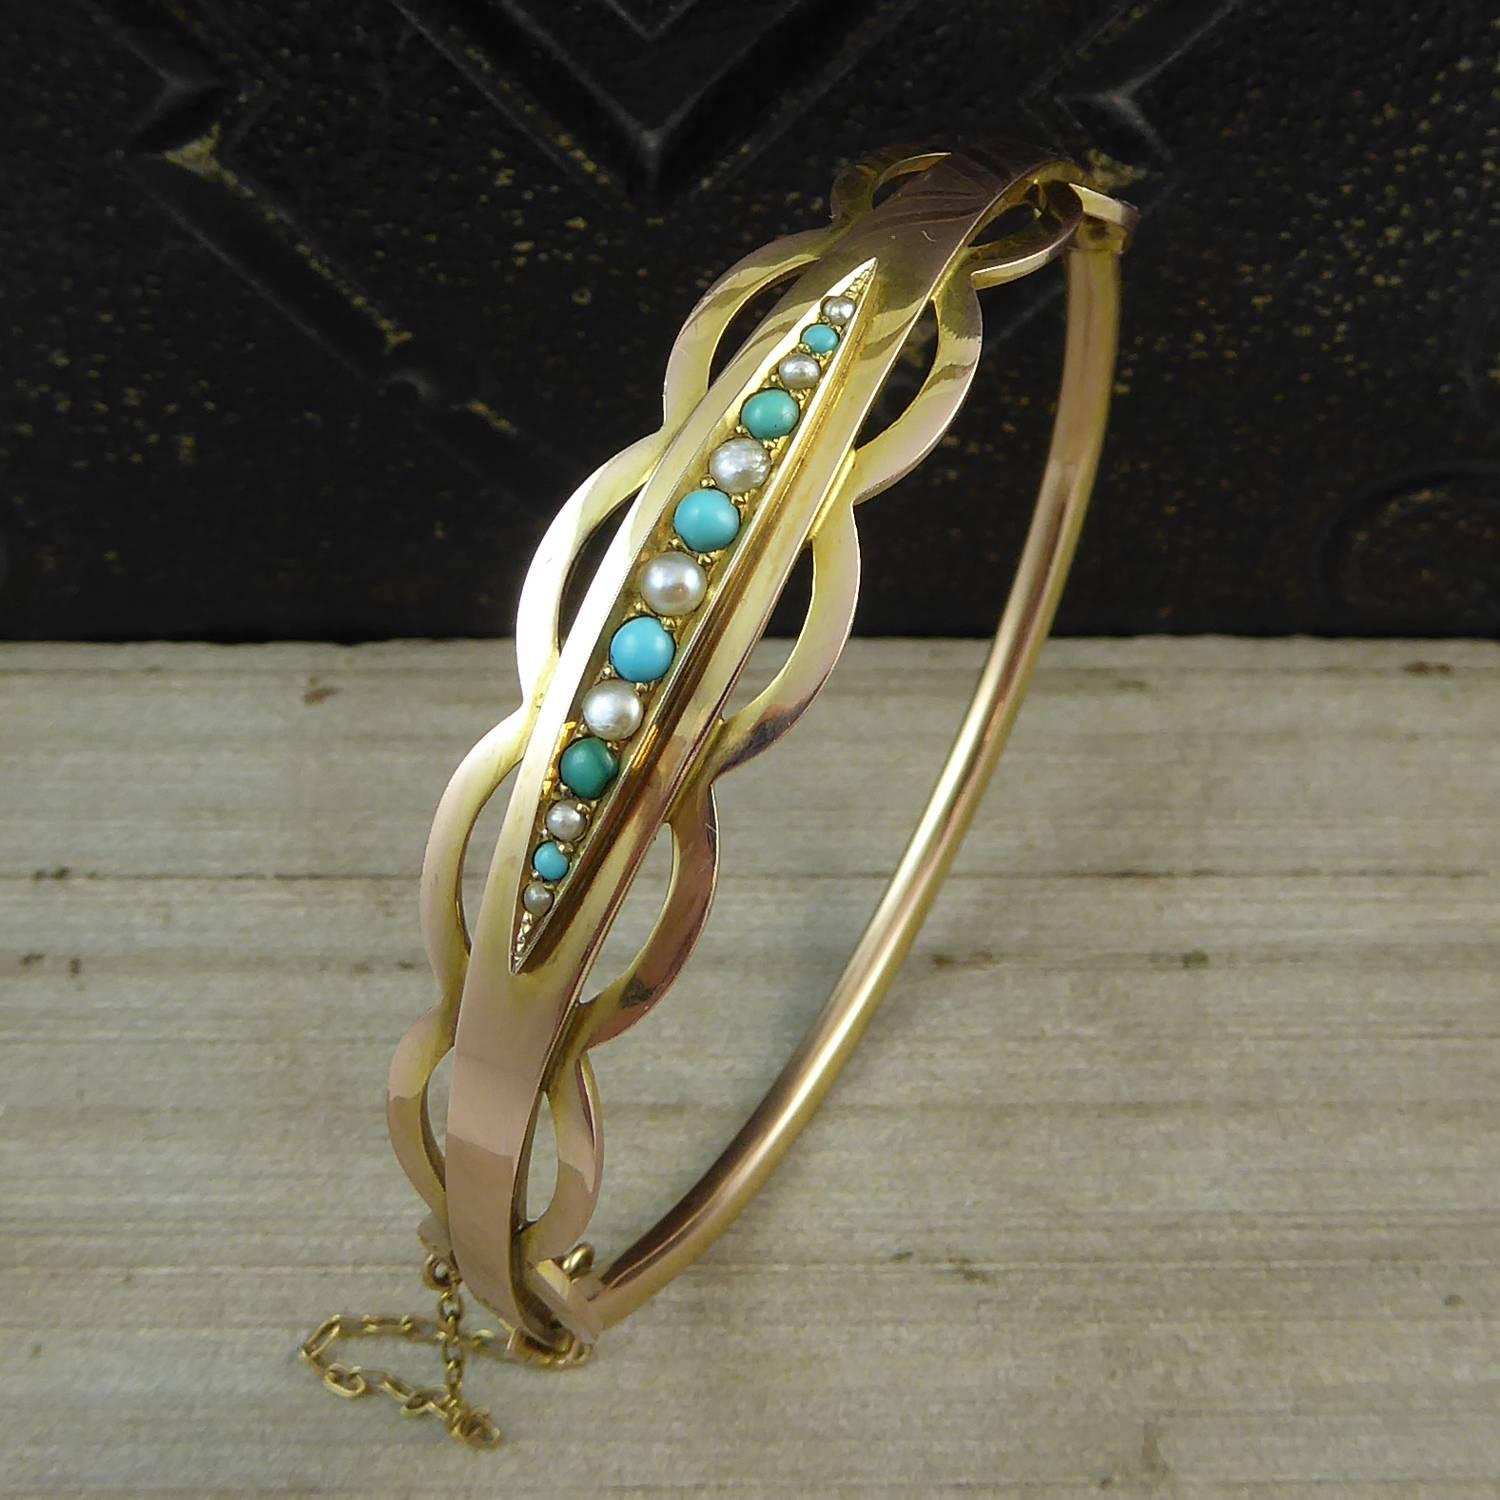 An antique bracelet dating from the English Edwardian era.  Set to the front half with a row of turquoise and pearls, graduating down in size from the central pearl, in a navette shaped mount to a plain polished yellow gold band.  The edges of the